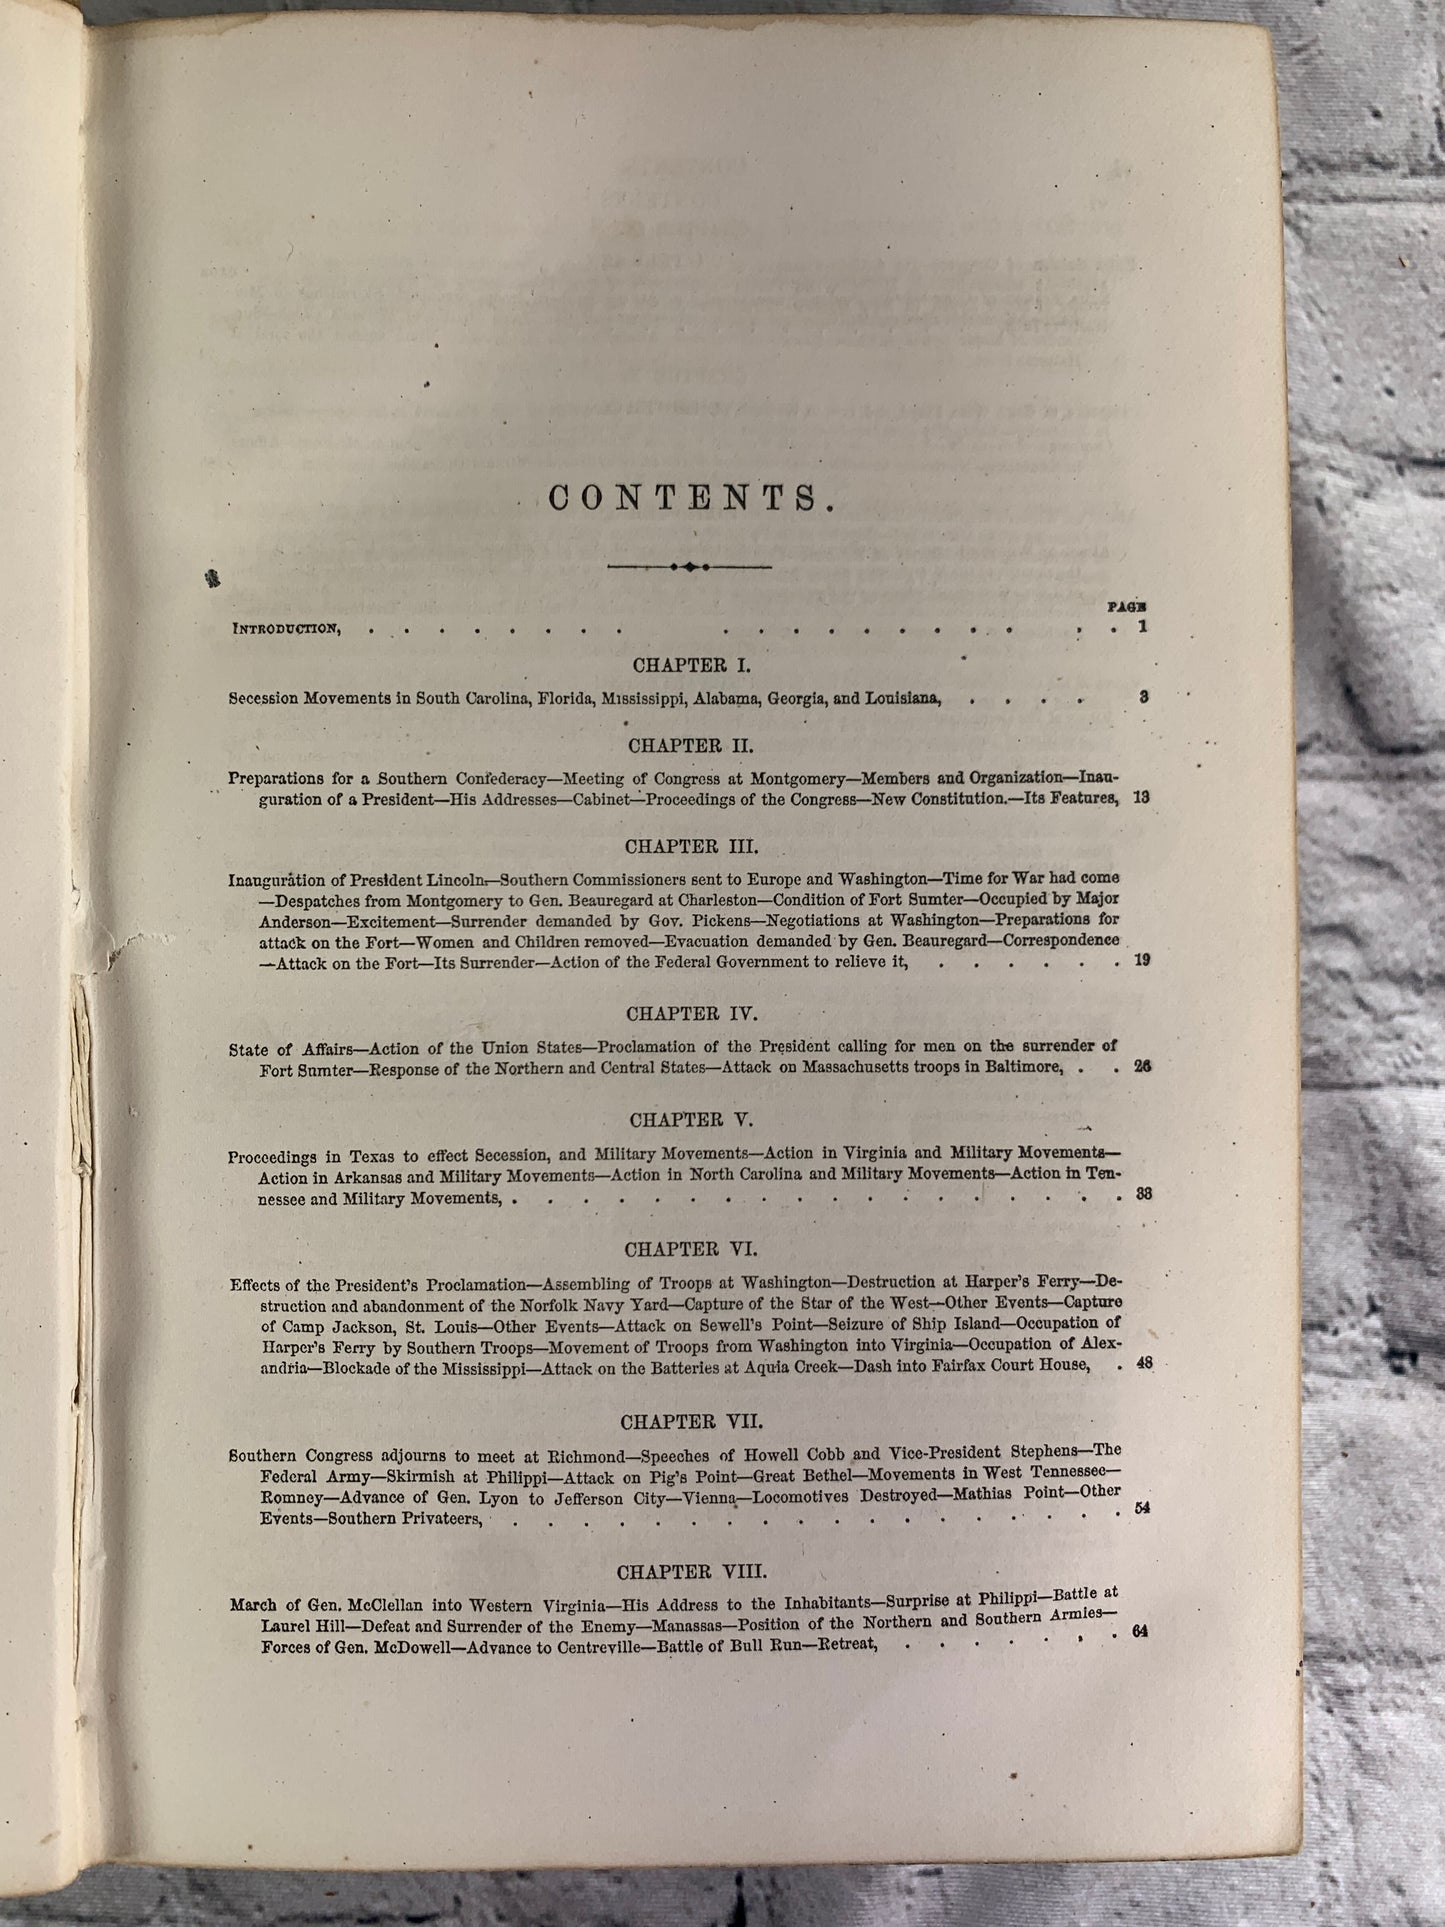 The Military and Naval History of the Rebellion by W.J. Tenney [1865]